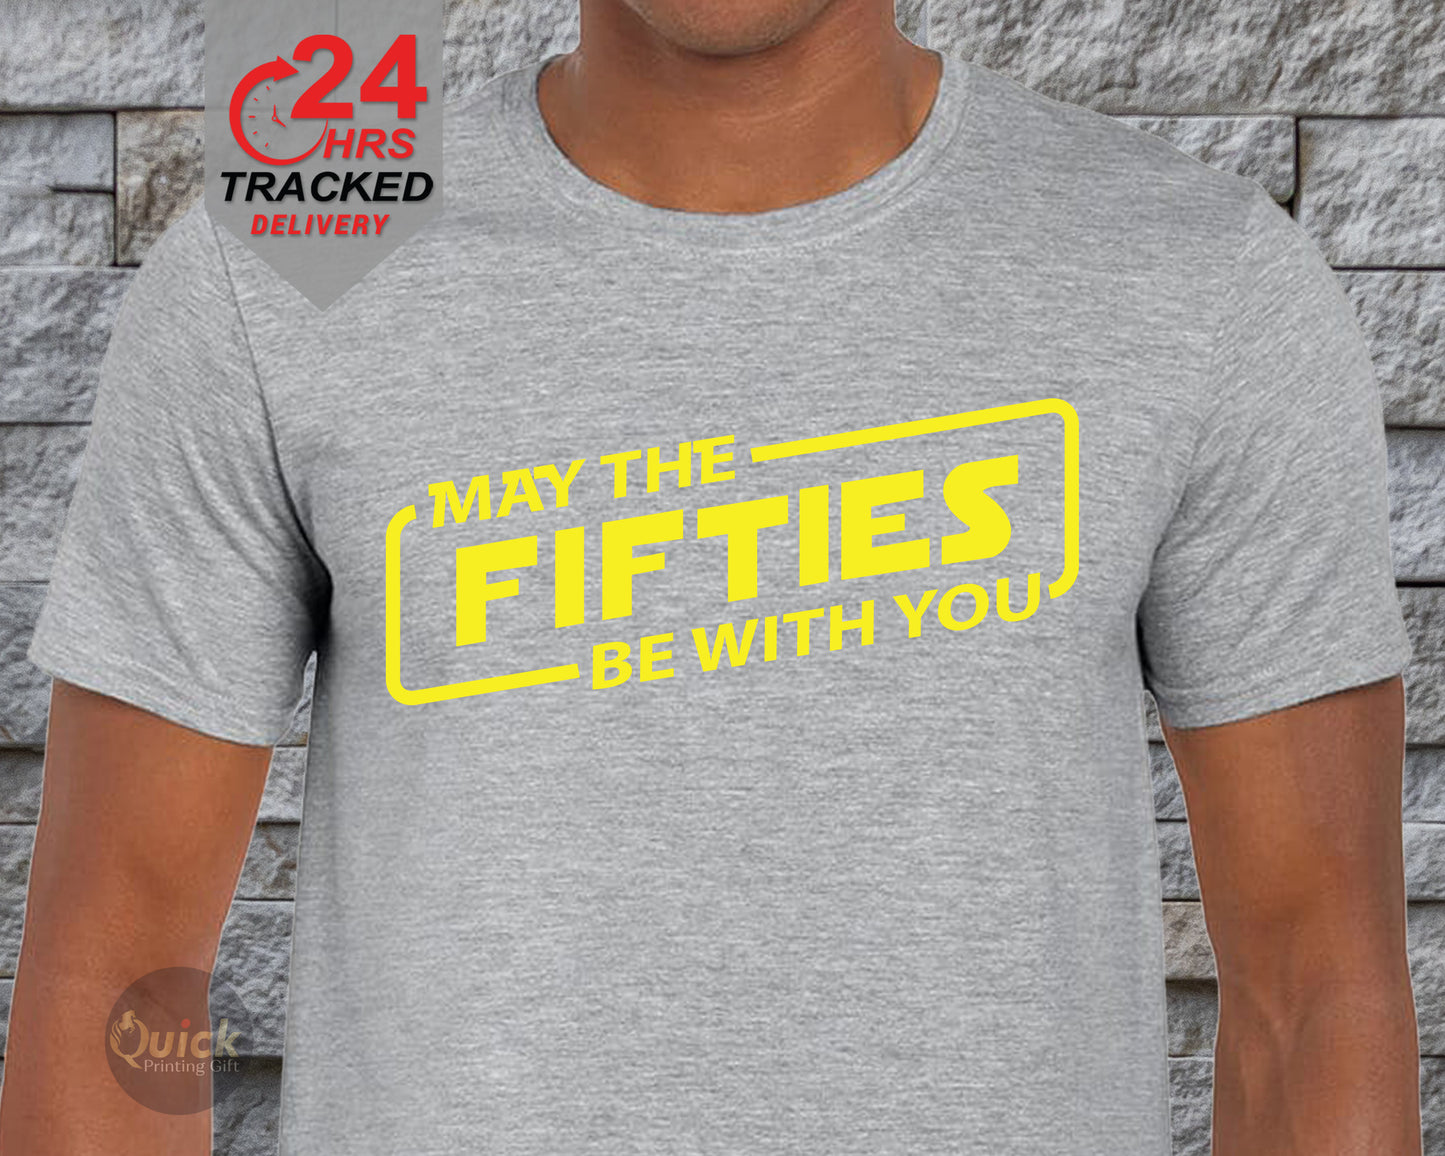 May The Fifties Be With You Tshirt, The Ideal 50th Birthday Gift for Men, Fathers Day Shirt for Dad, 50 Year Old Man shirt.